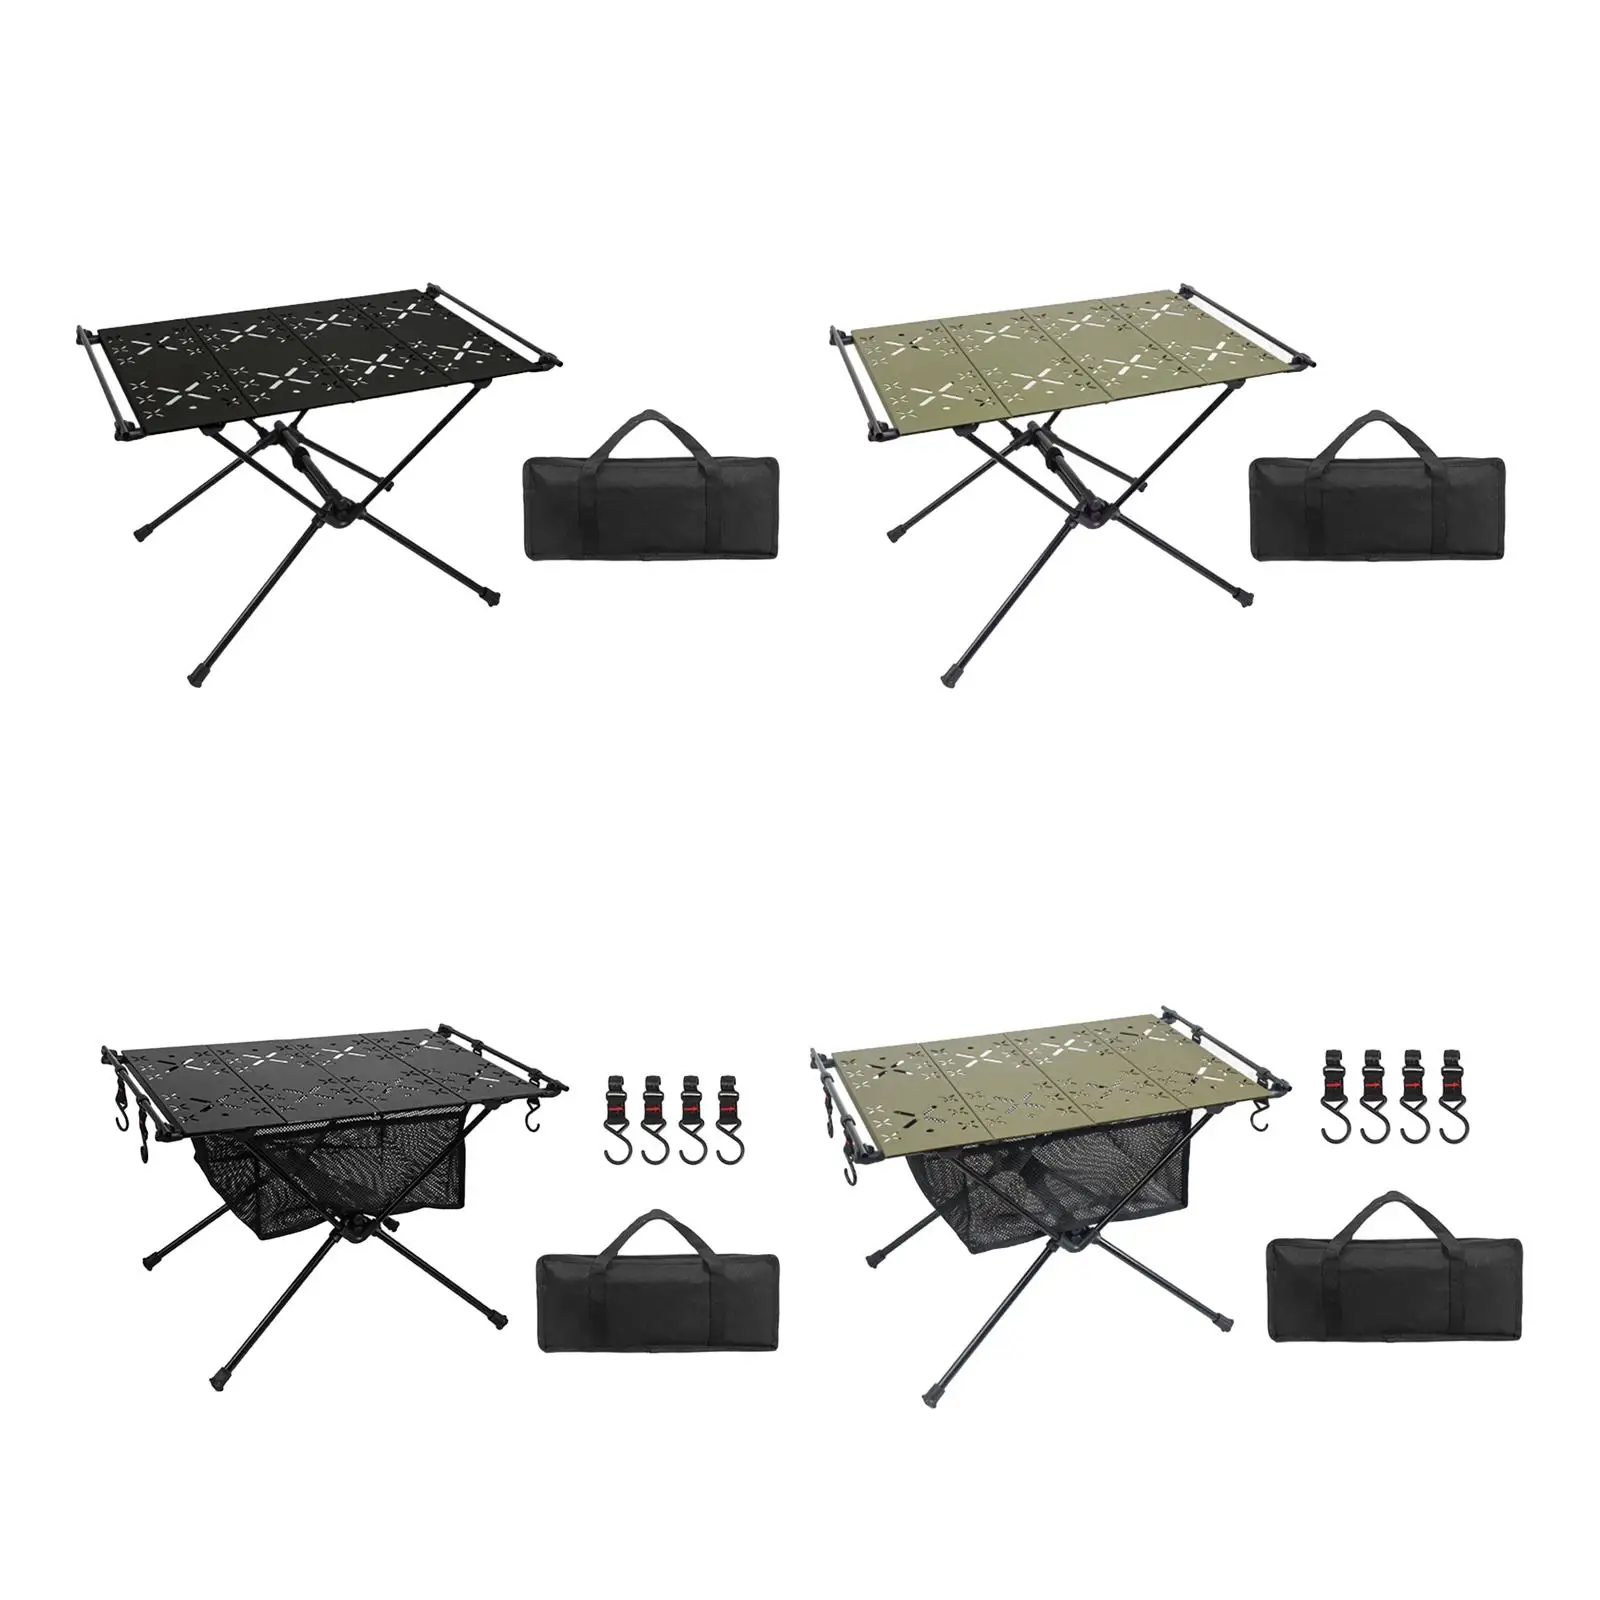 Foldable Camping Table Furniture Camp Table with Carry Bag Camping Desk Outdoor Table for Yard Backyard Patio Picnic Hiking